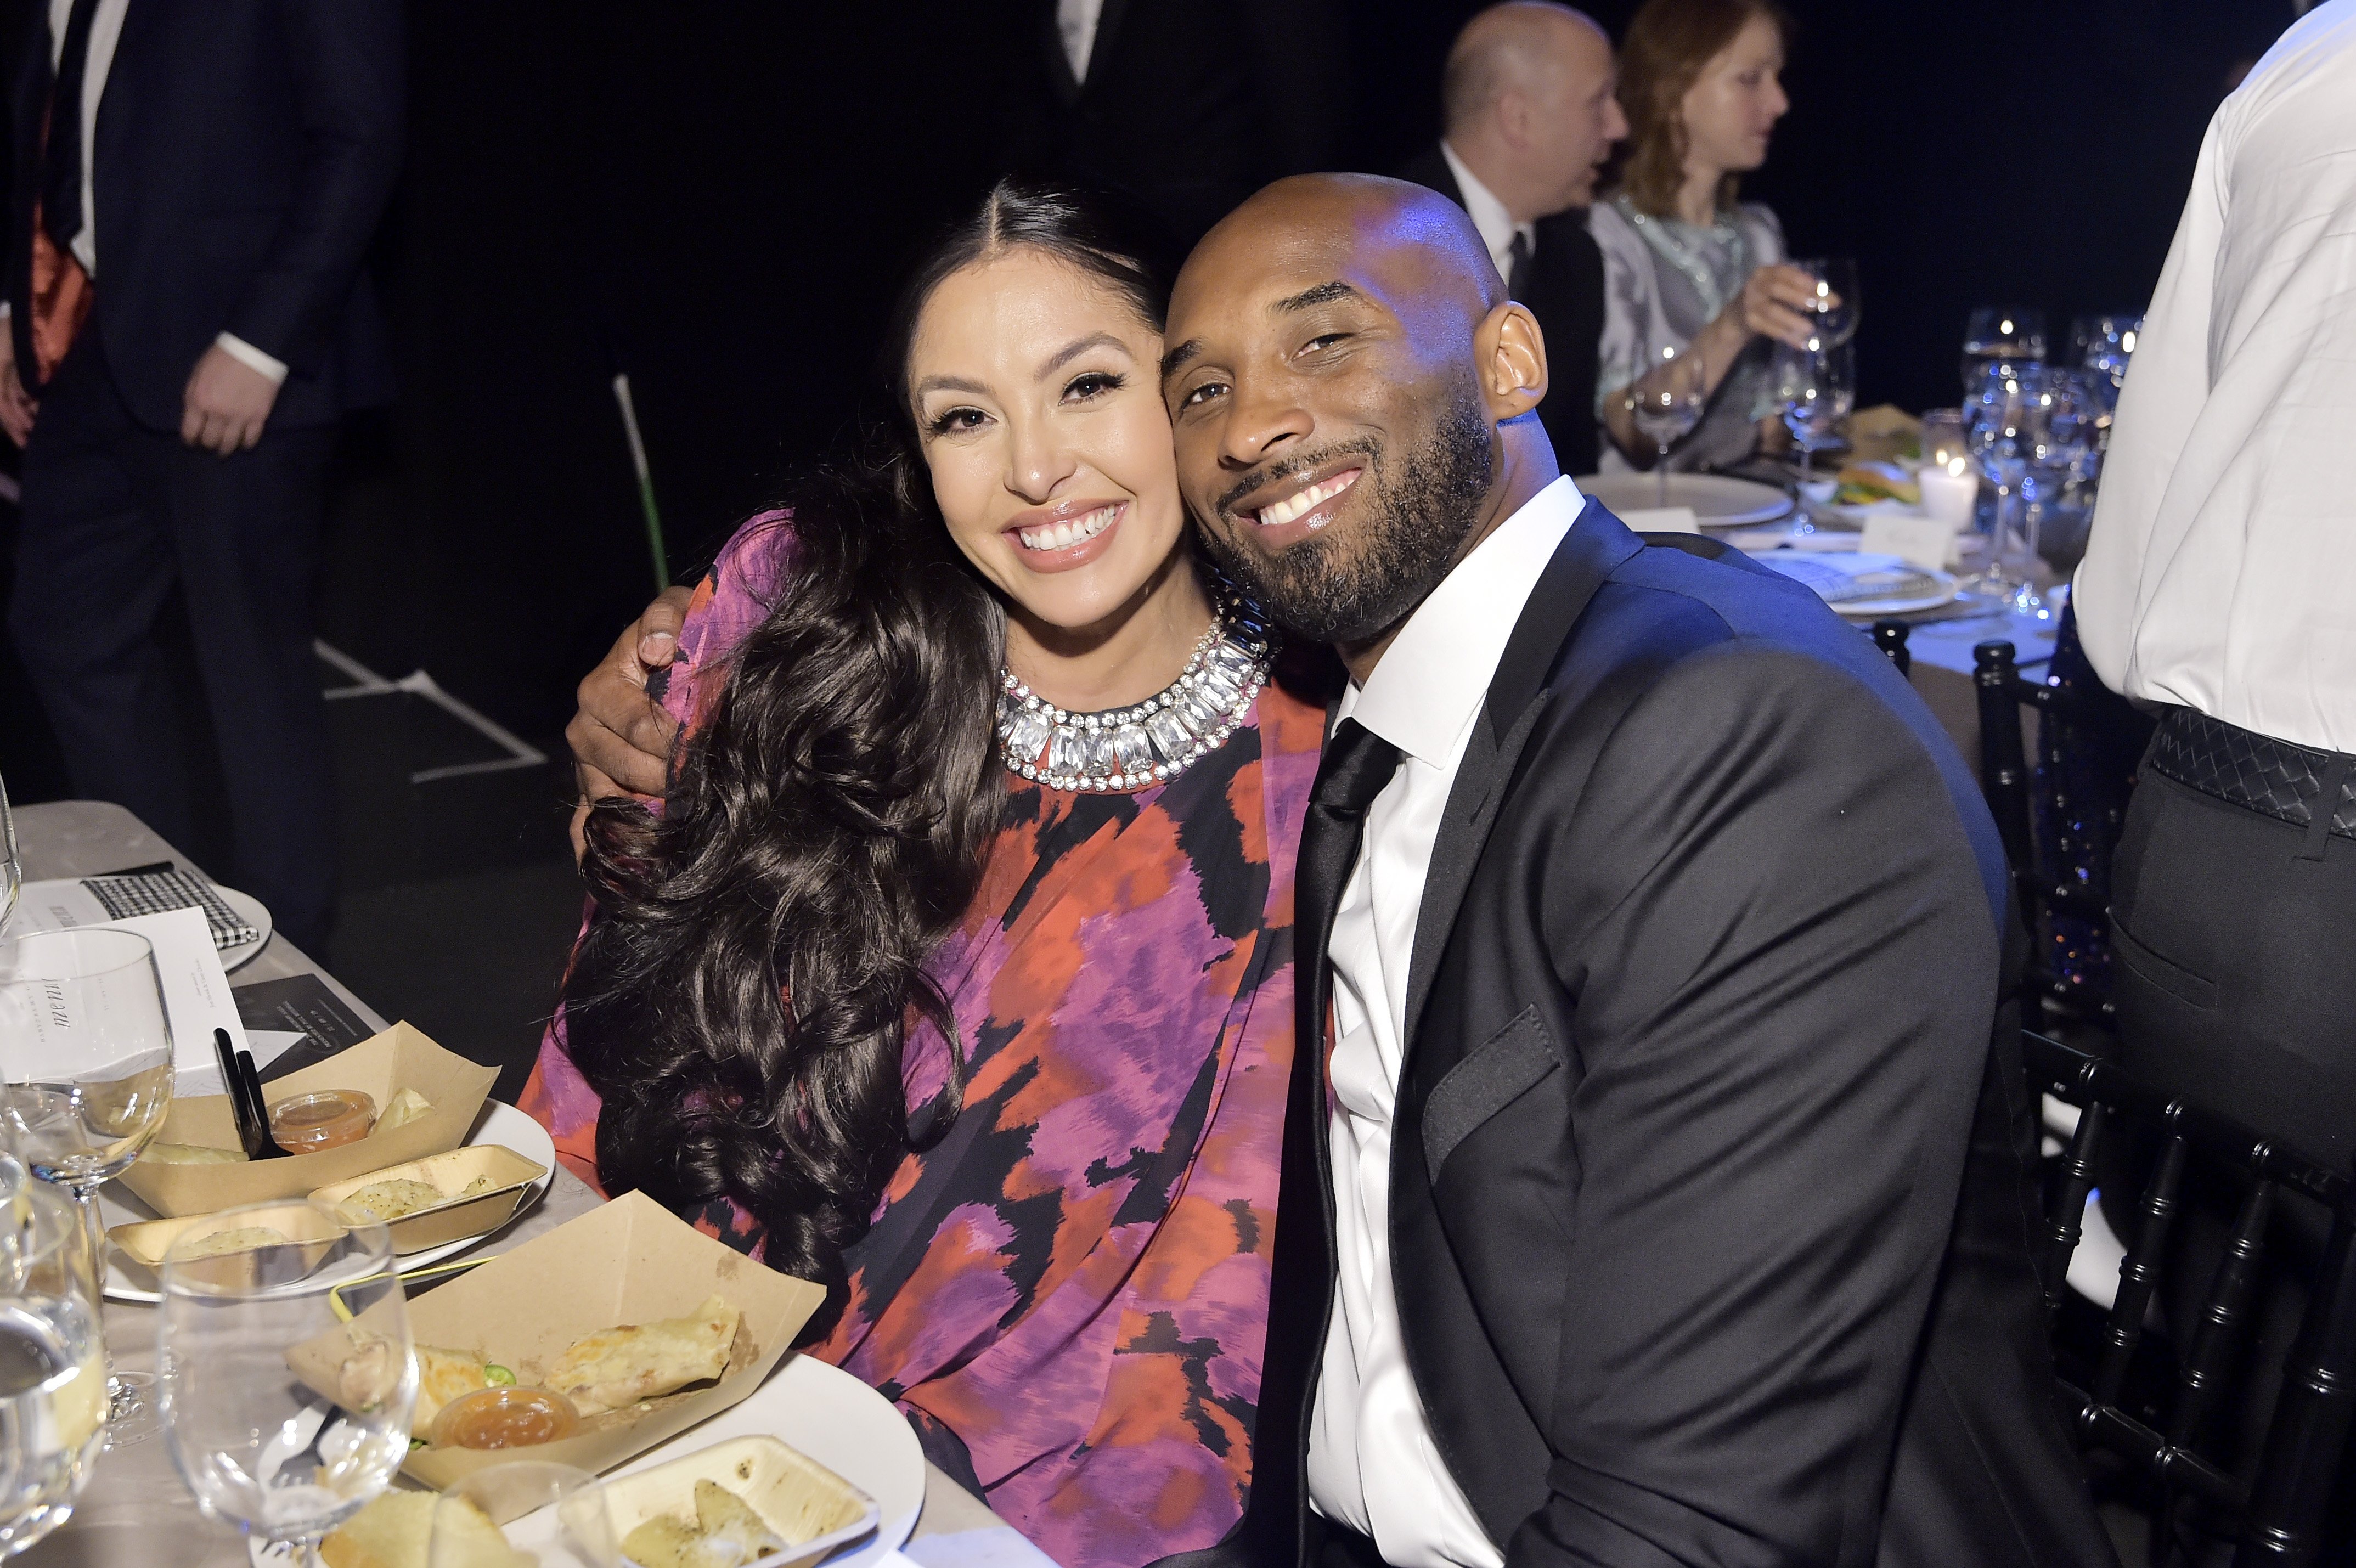 Vanessa Laine Bryant and Kobe Bryant attend the 2019 Baby2Baby Gala on November 09, 2019. | Photo: Getty Images.